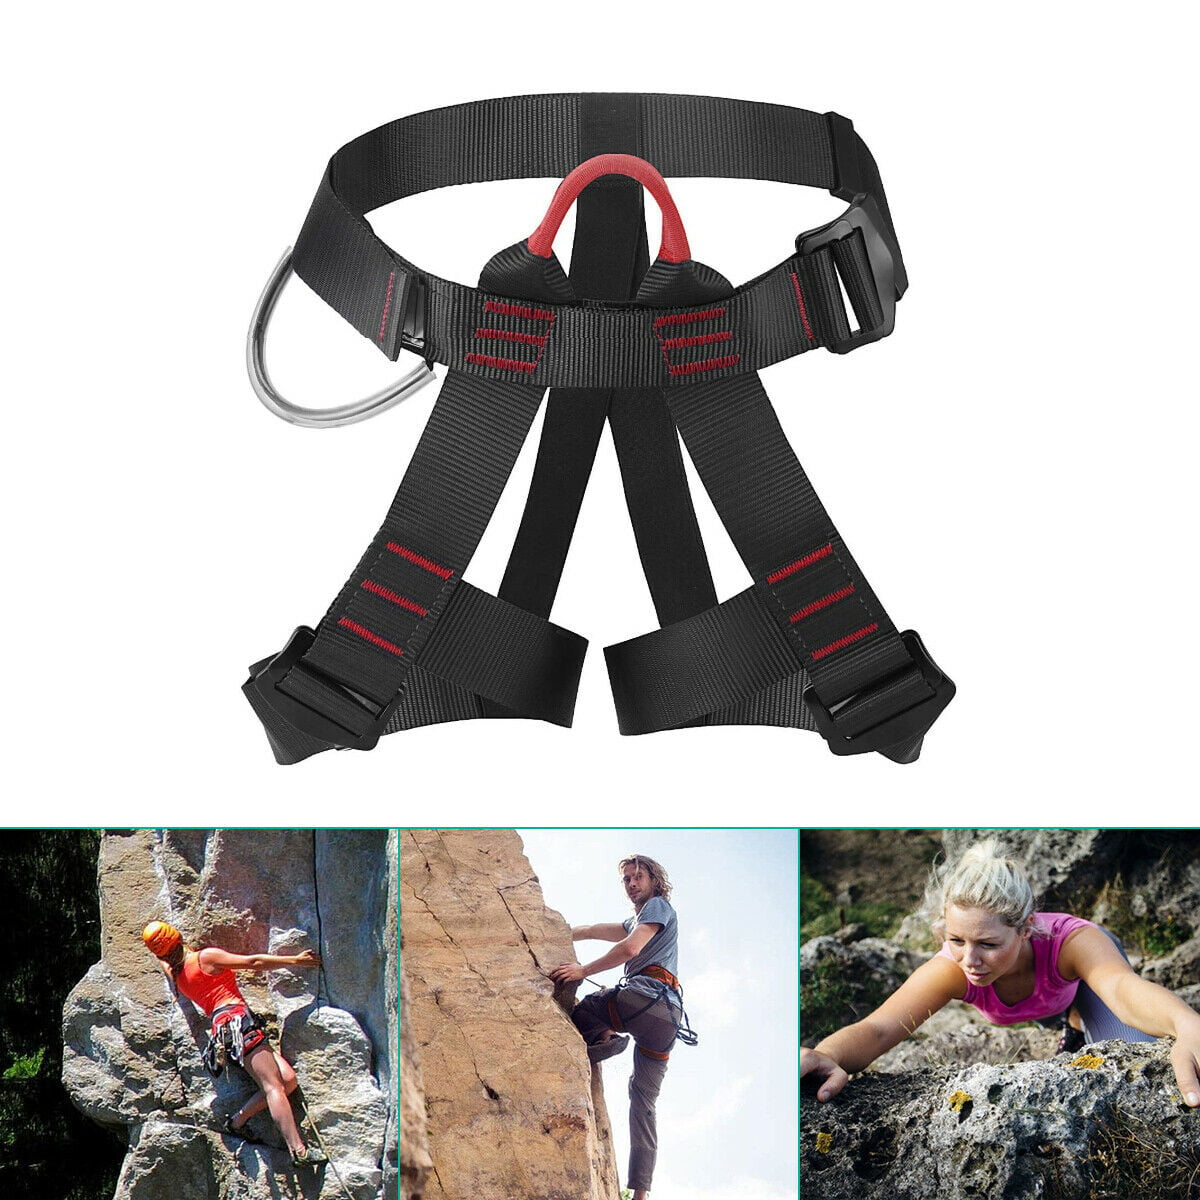 Tree Carving Rock Climbing Harness Equip Gear Rappelling Rescue Safety Seat Belt 